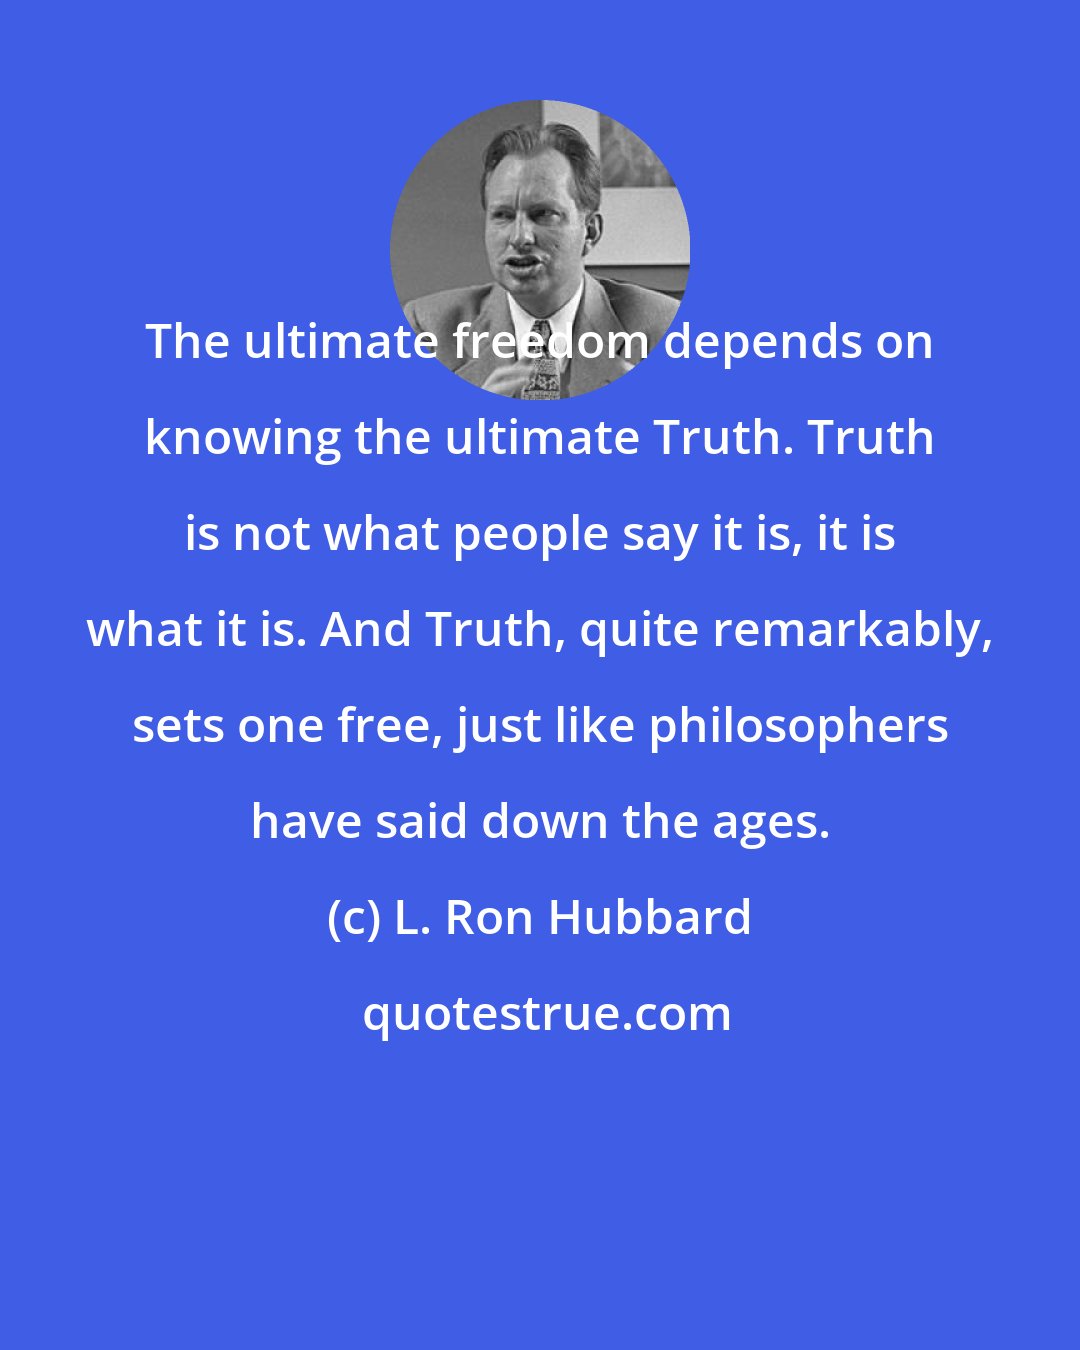 L. Ron Hubbard: The ultimate freedom depends on knowing the ultimate Truth. Truth is not what people say it is, it is what it is. And Truth, quite remarkably, sets one free, just like philosophers have said down the ages.